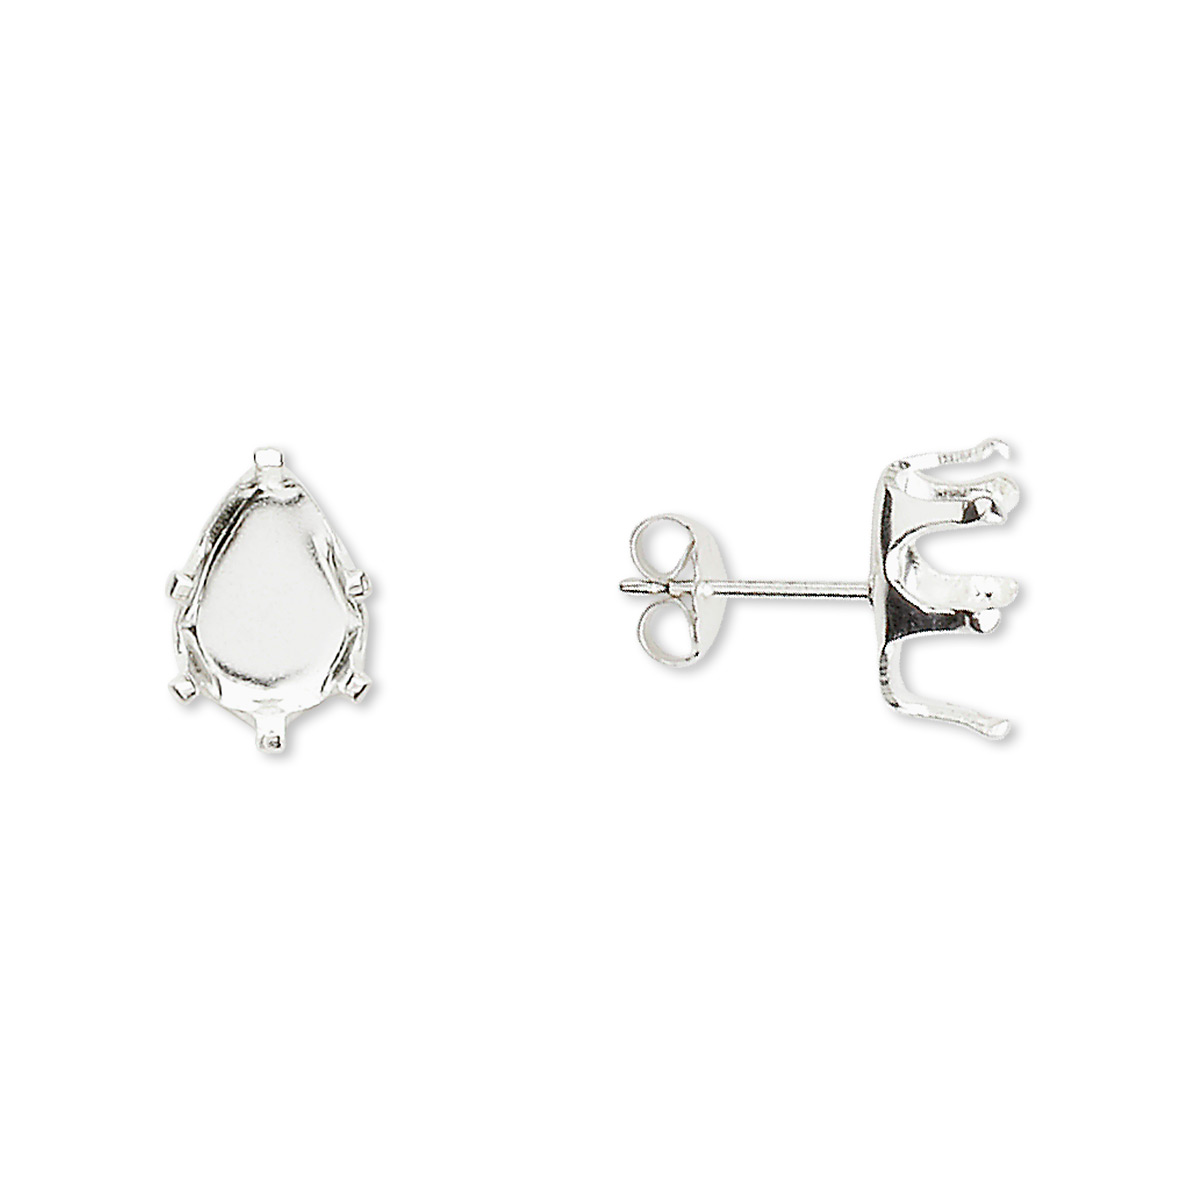 Earstud, Snap-Tite®, sterling silver, 10x7mm 6-prong pear setting. Sold ...